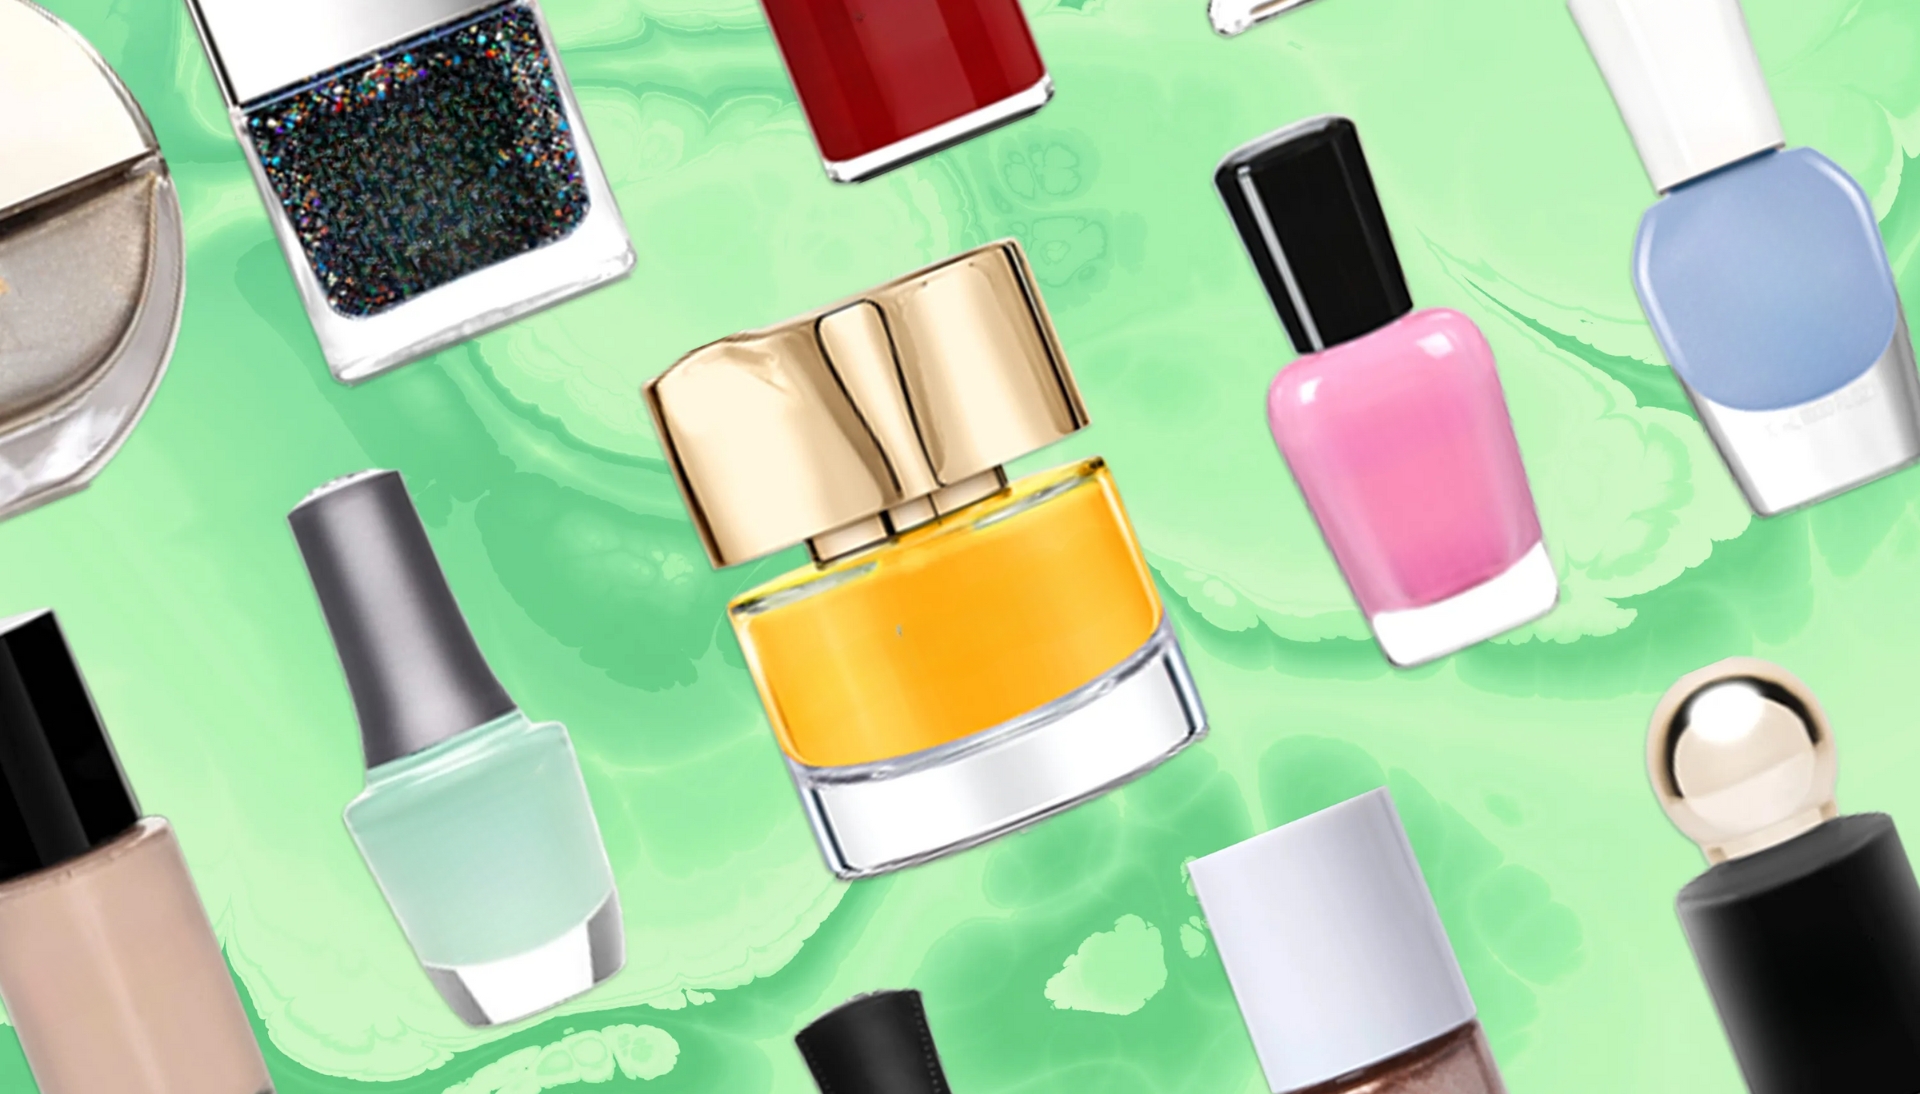 Illustration of various iconic nail products.